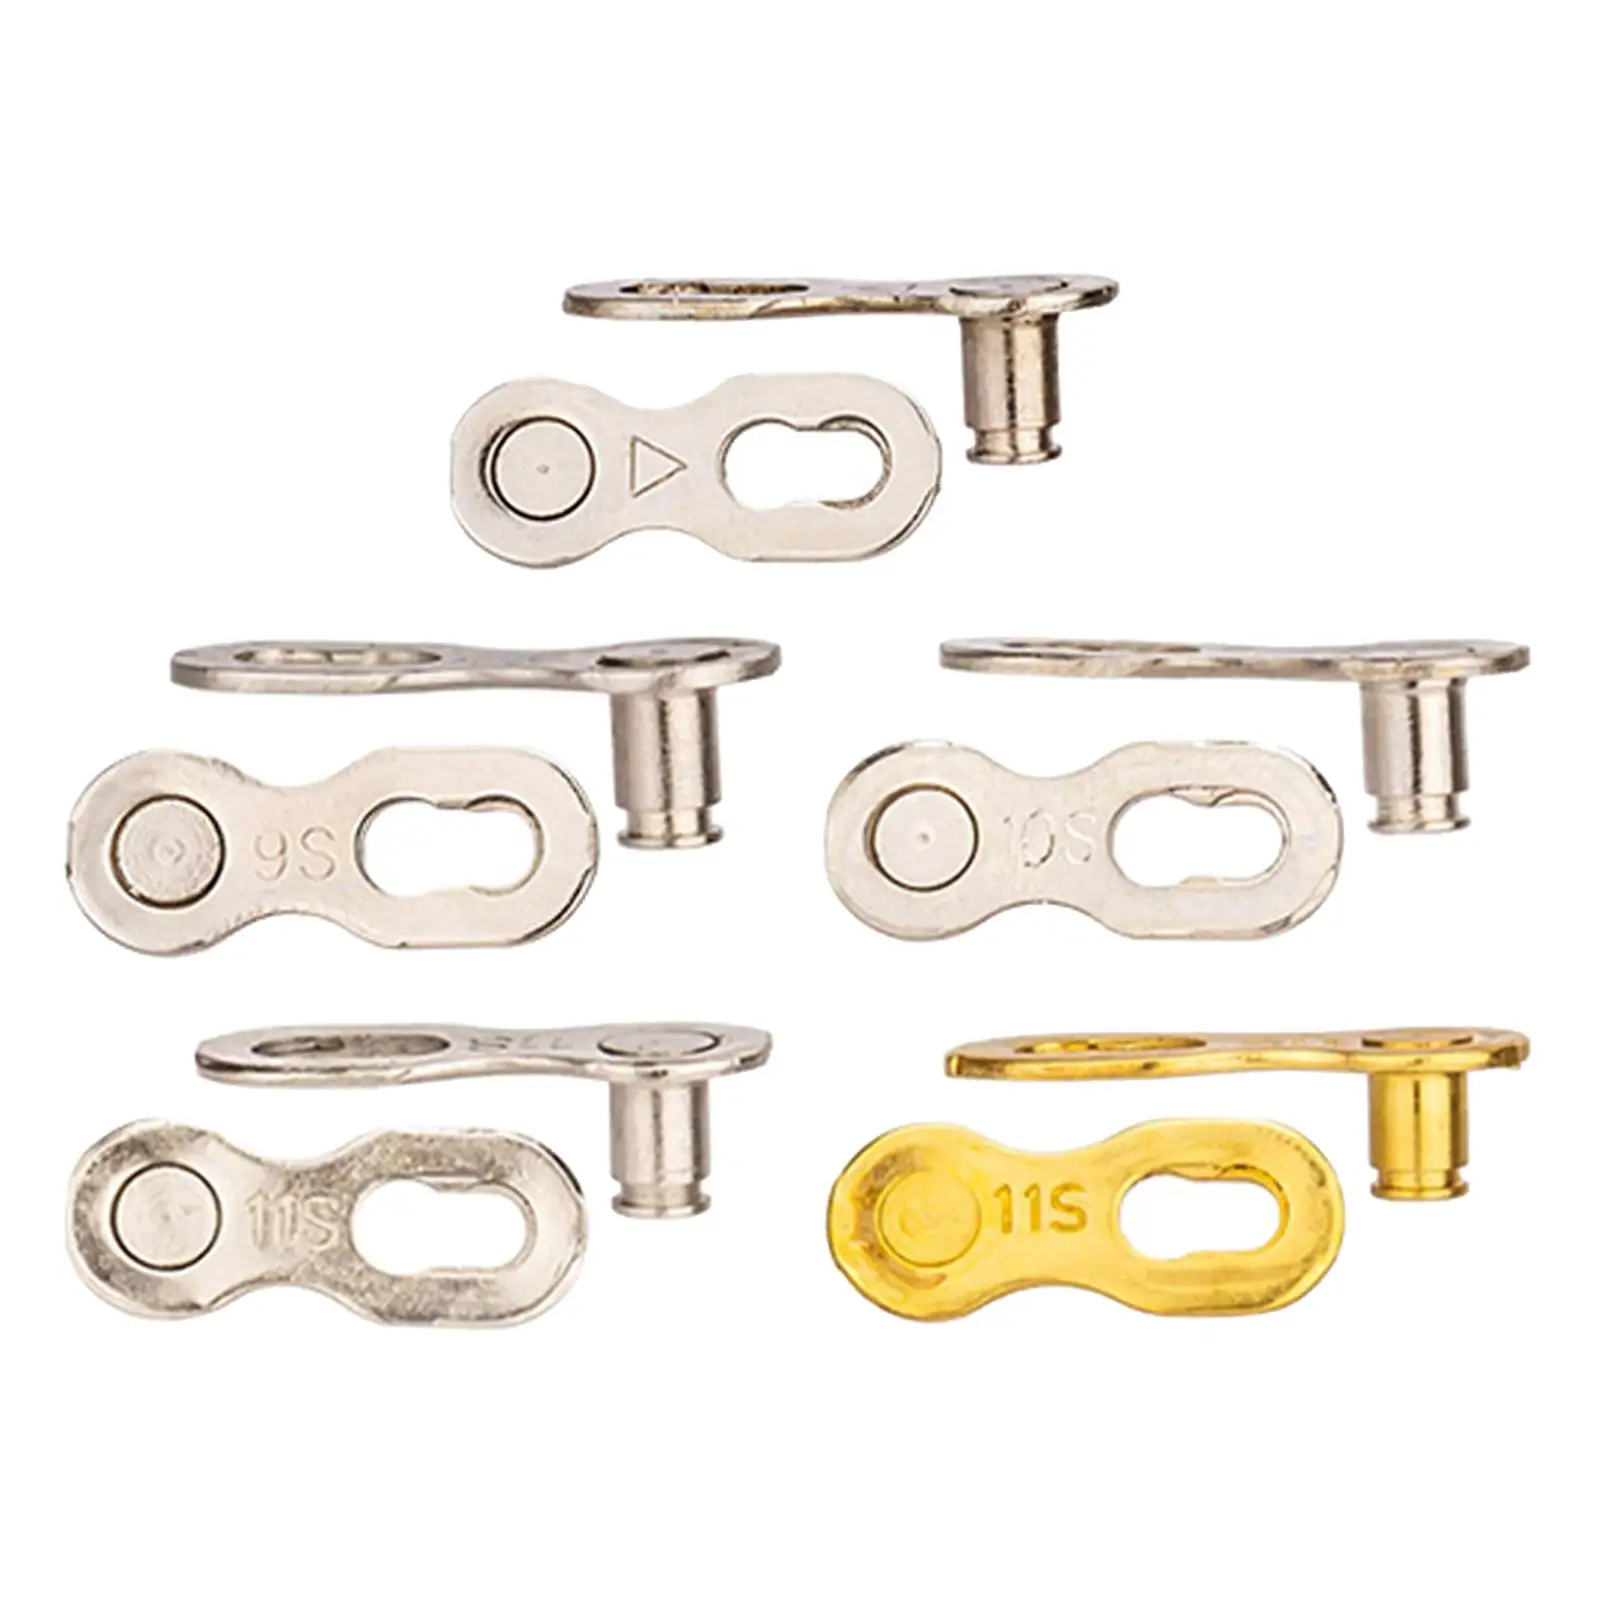 Steel 6 Pairs Master Chain Link Bike Joint Connector Reusable Quick-Link Bicycle Chain Tool for 6 7 8 9 10 11 Speed Repair MTB